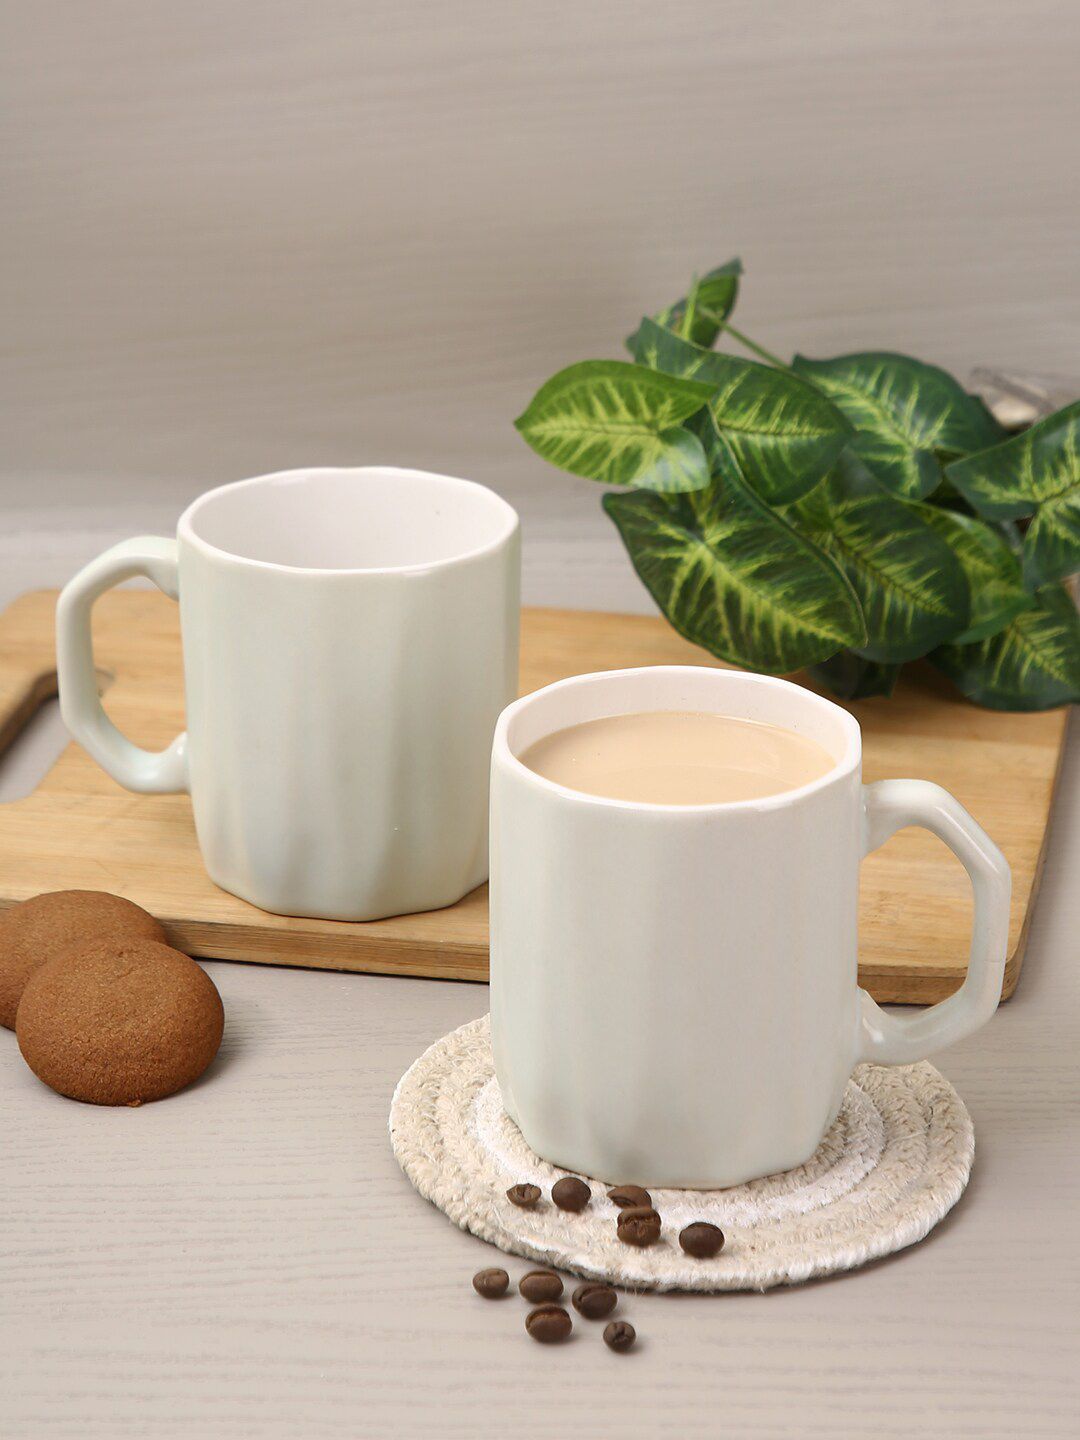 Aapno Rajasthan Set of 2 Solid Ceramic Glossy Cups Price in India